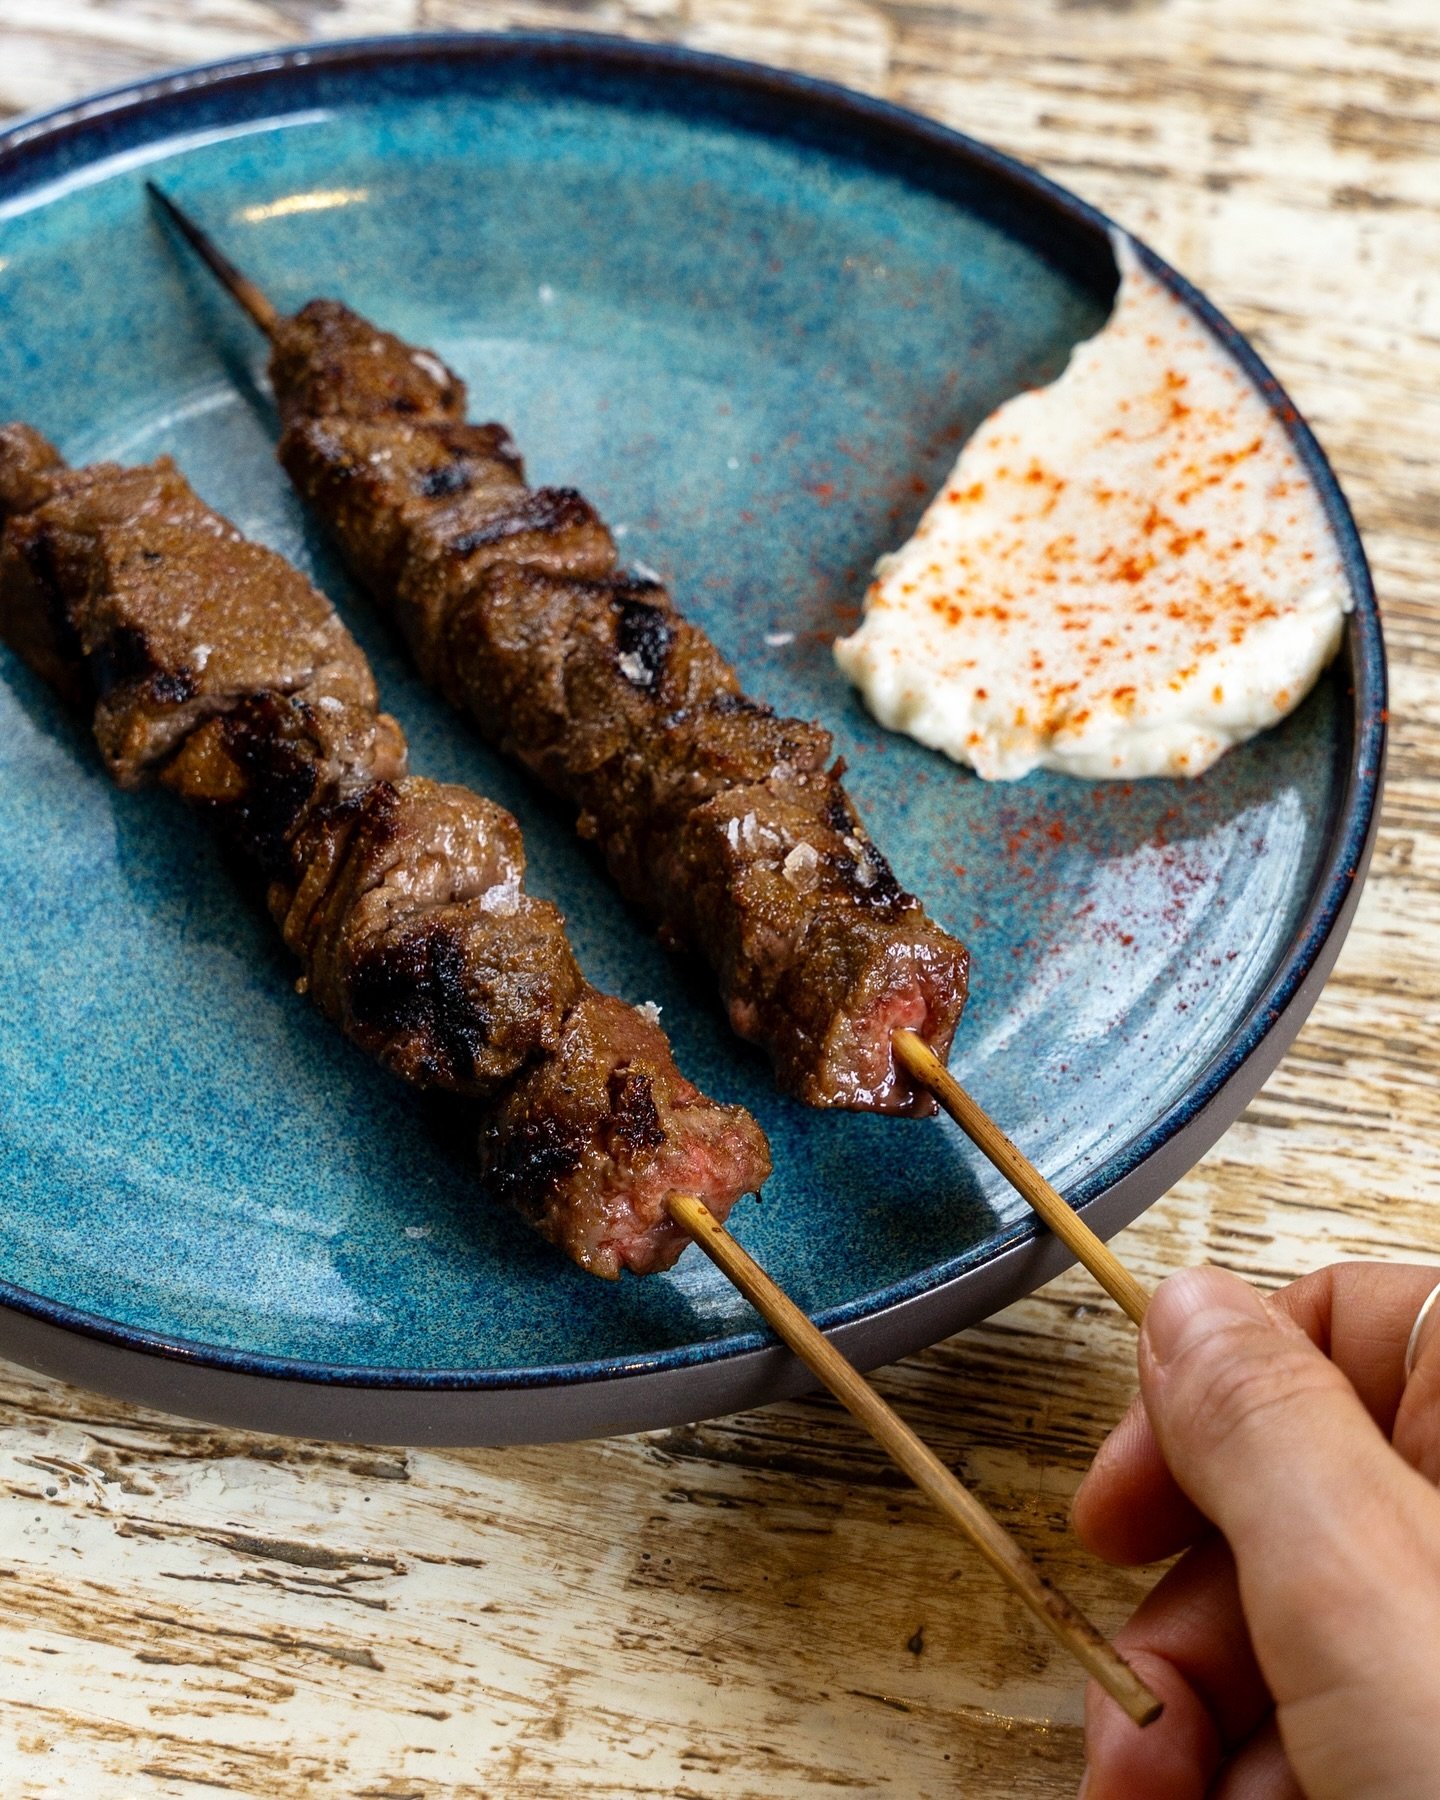 Cumin &amp; Aleppo Beef Skewers with Confit Garlic Toum

Now available for lunch and dinner, the perfect little bite to get the appetite going!